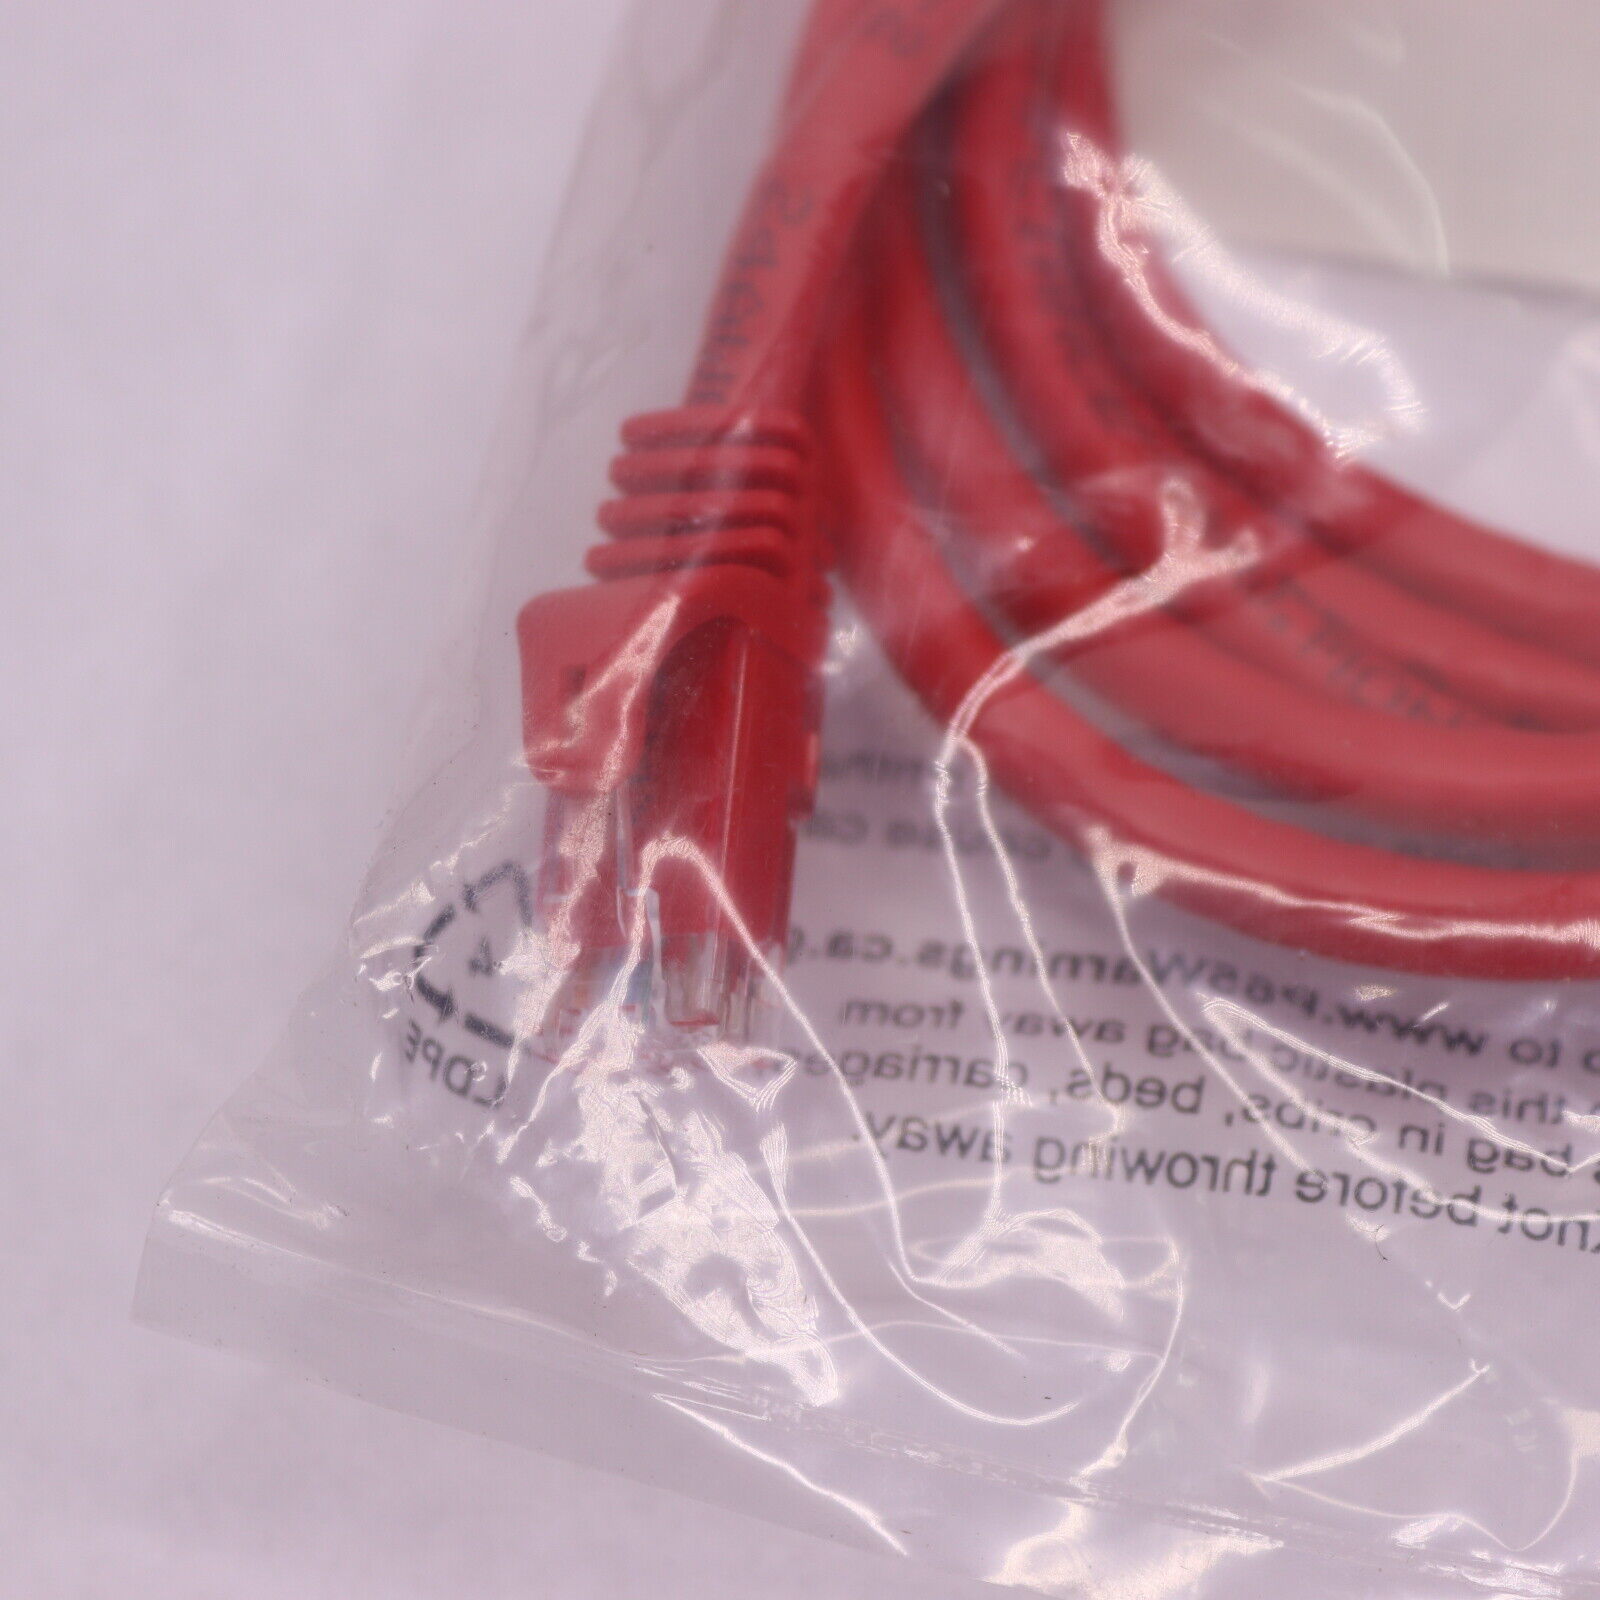 Monoprice Flexboot Cat6 Ethernet Patch Cable RJ45 24 AWG Red 5' 9831